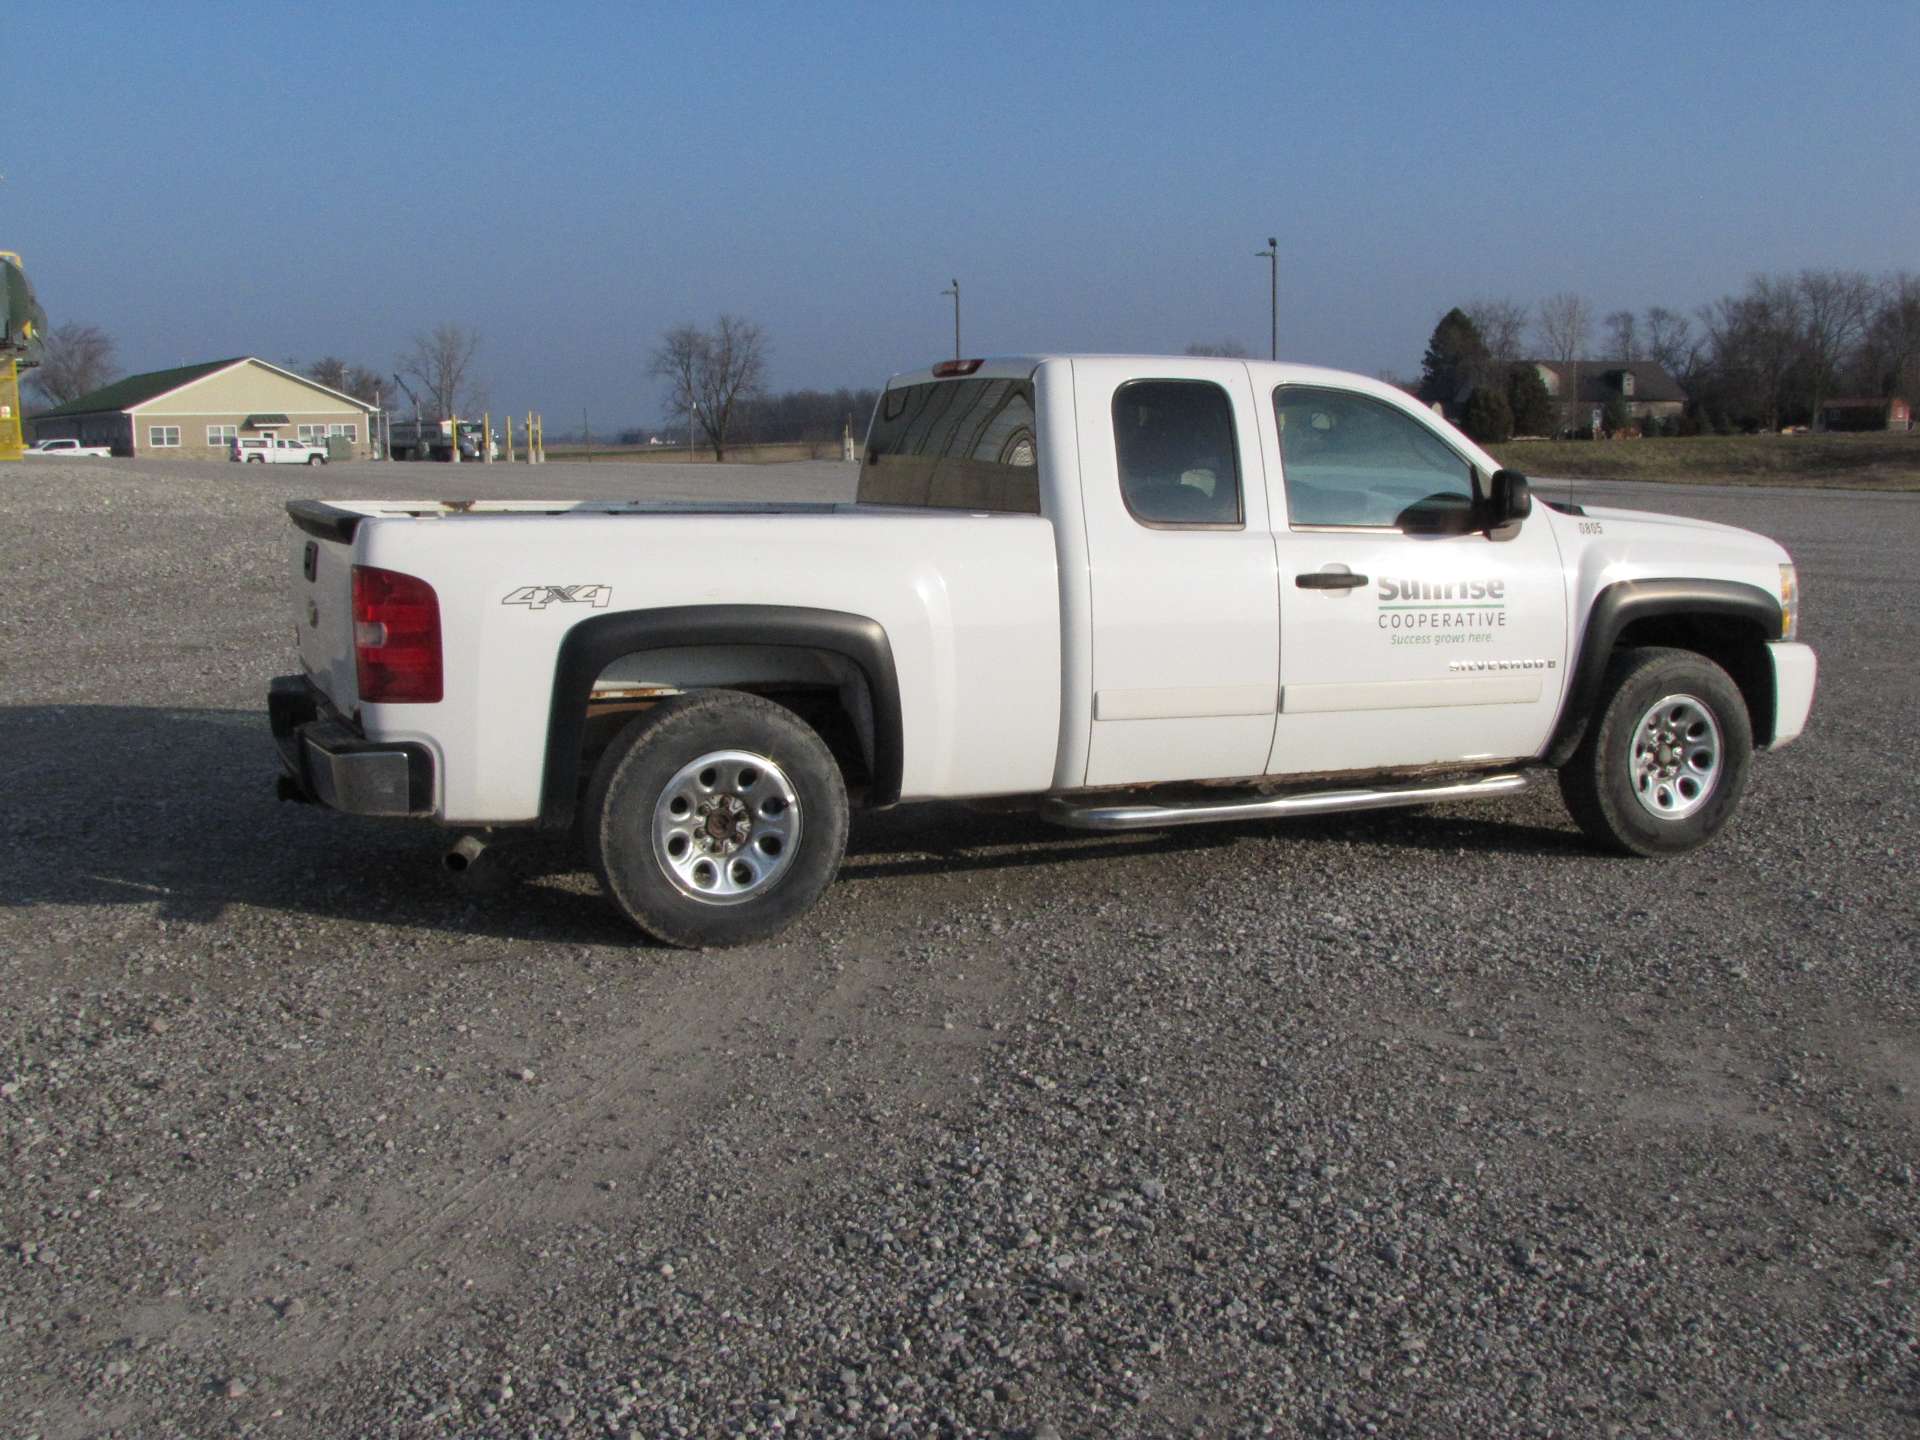 2008 Chevy Silverado 1500 LT Pickup Truck (CRACKED FRAME) - Image 4 of 43